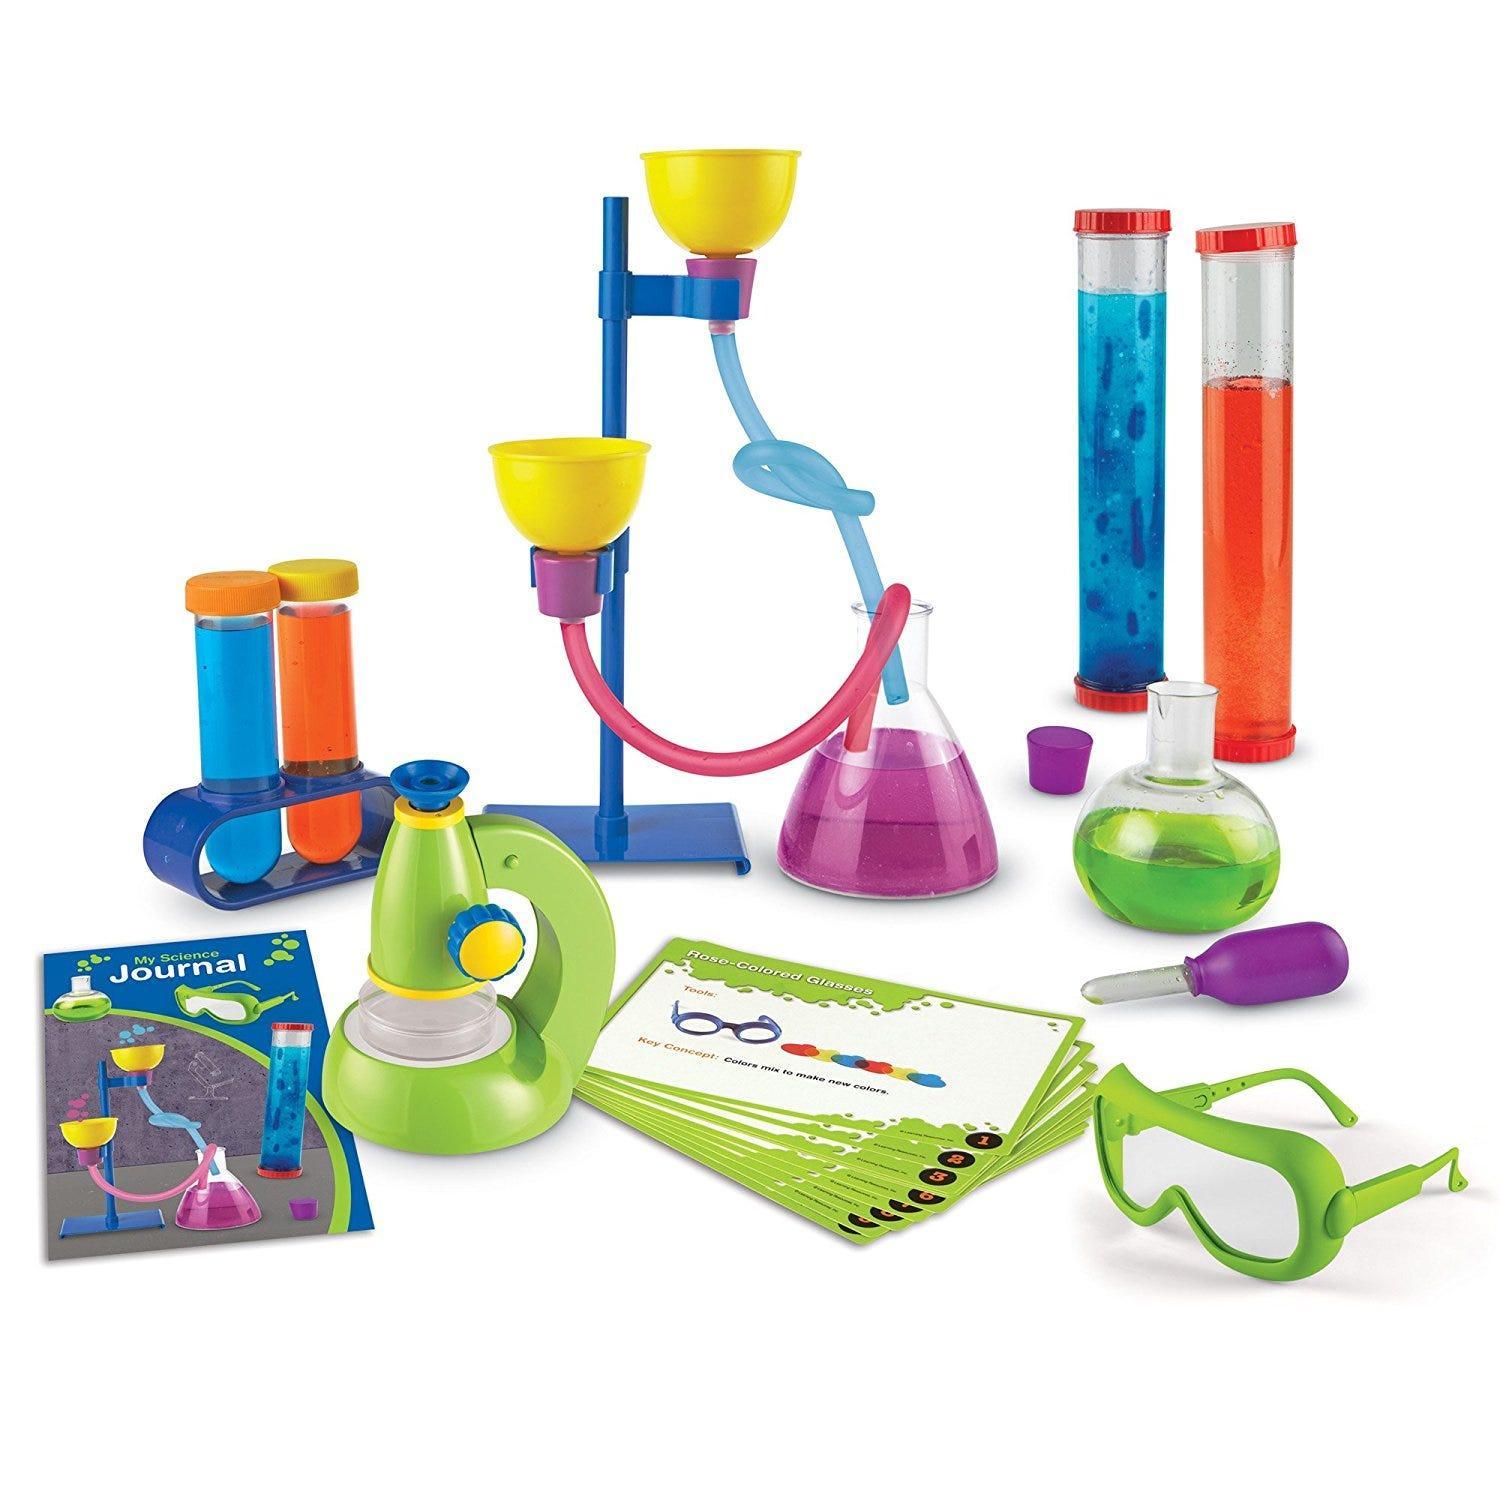 Learning Resources Bộ dụng cụ thí nghiệm khoa học cao cấp dành cho trẻ em - Primary Science Deluxe Lab Set